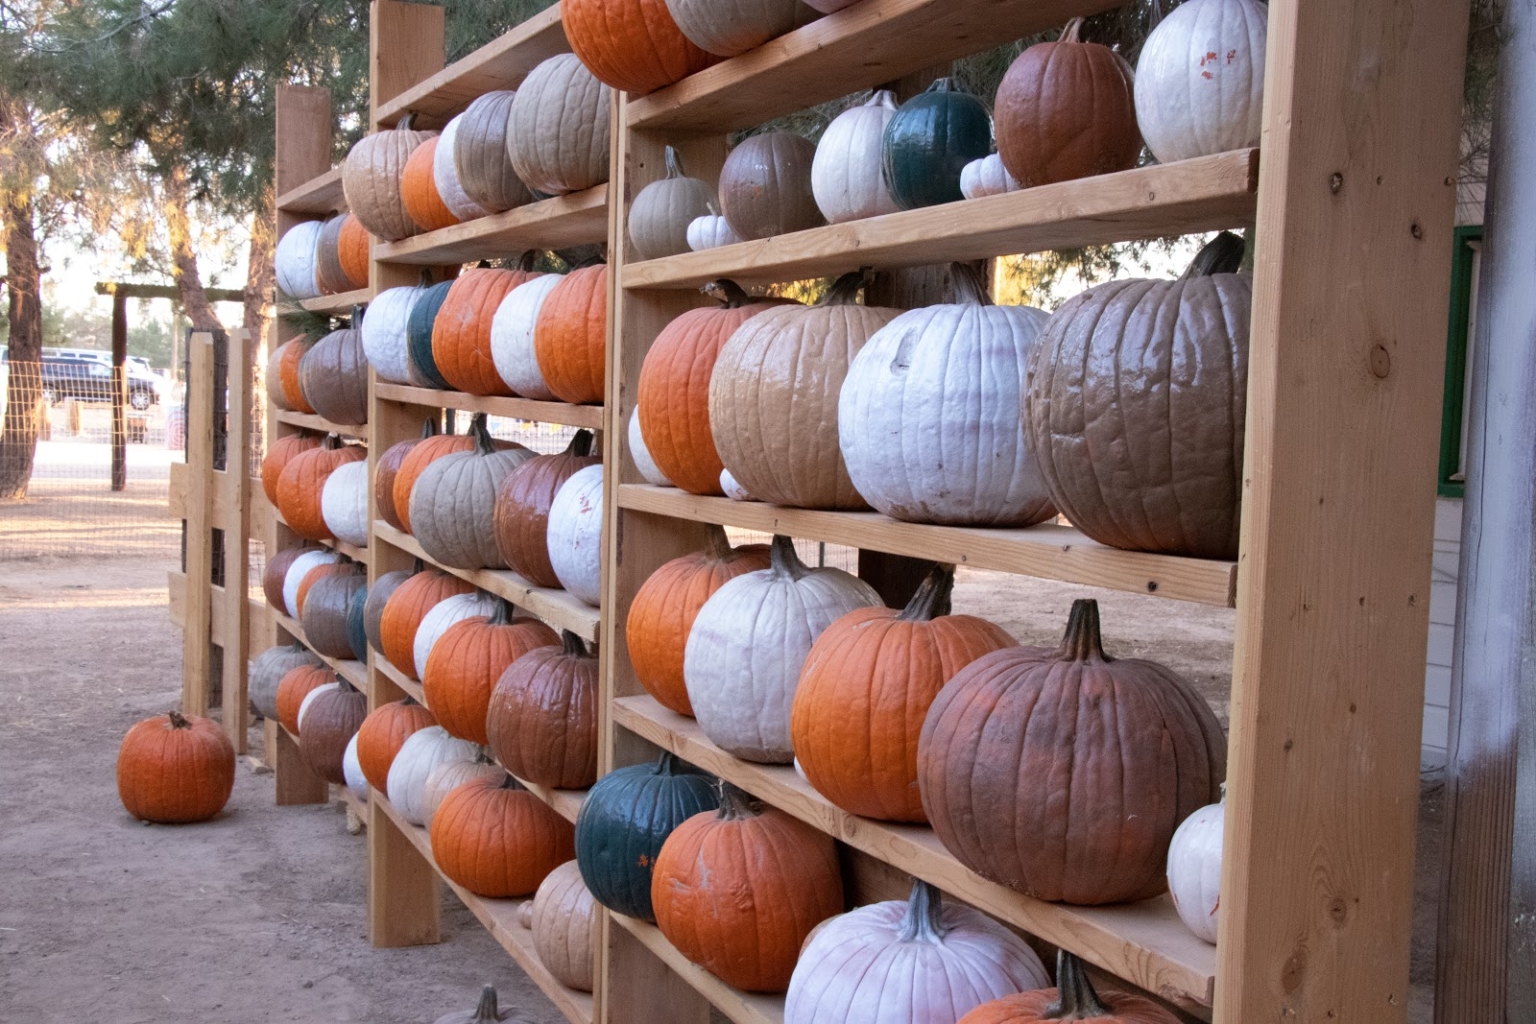 Pumpkin patches open across Arizona, but are they safe for families